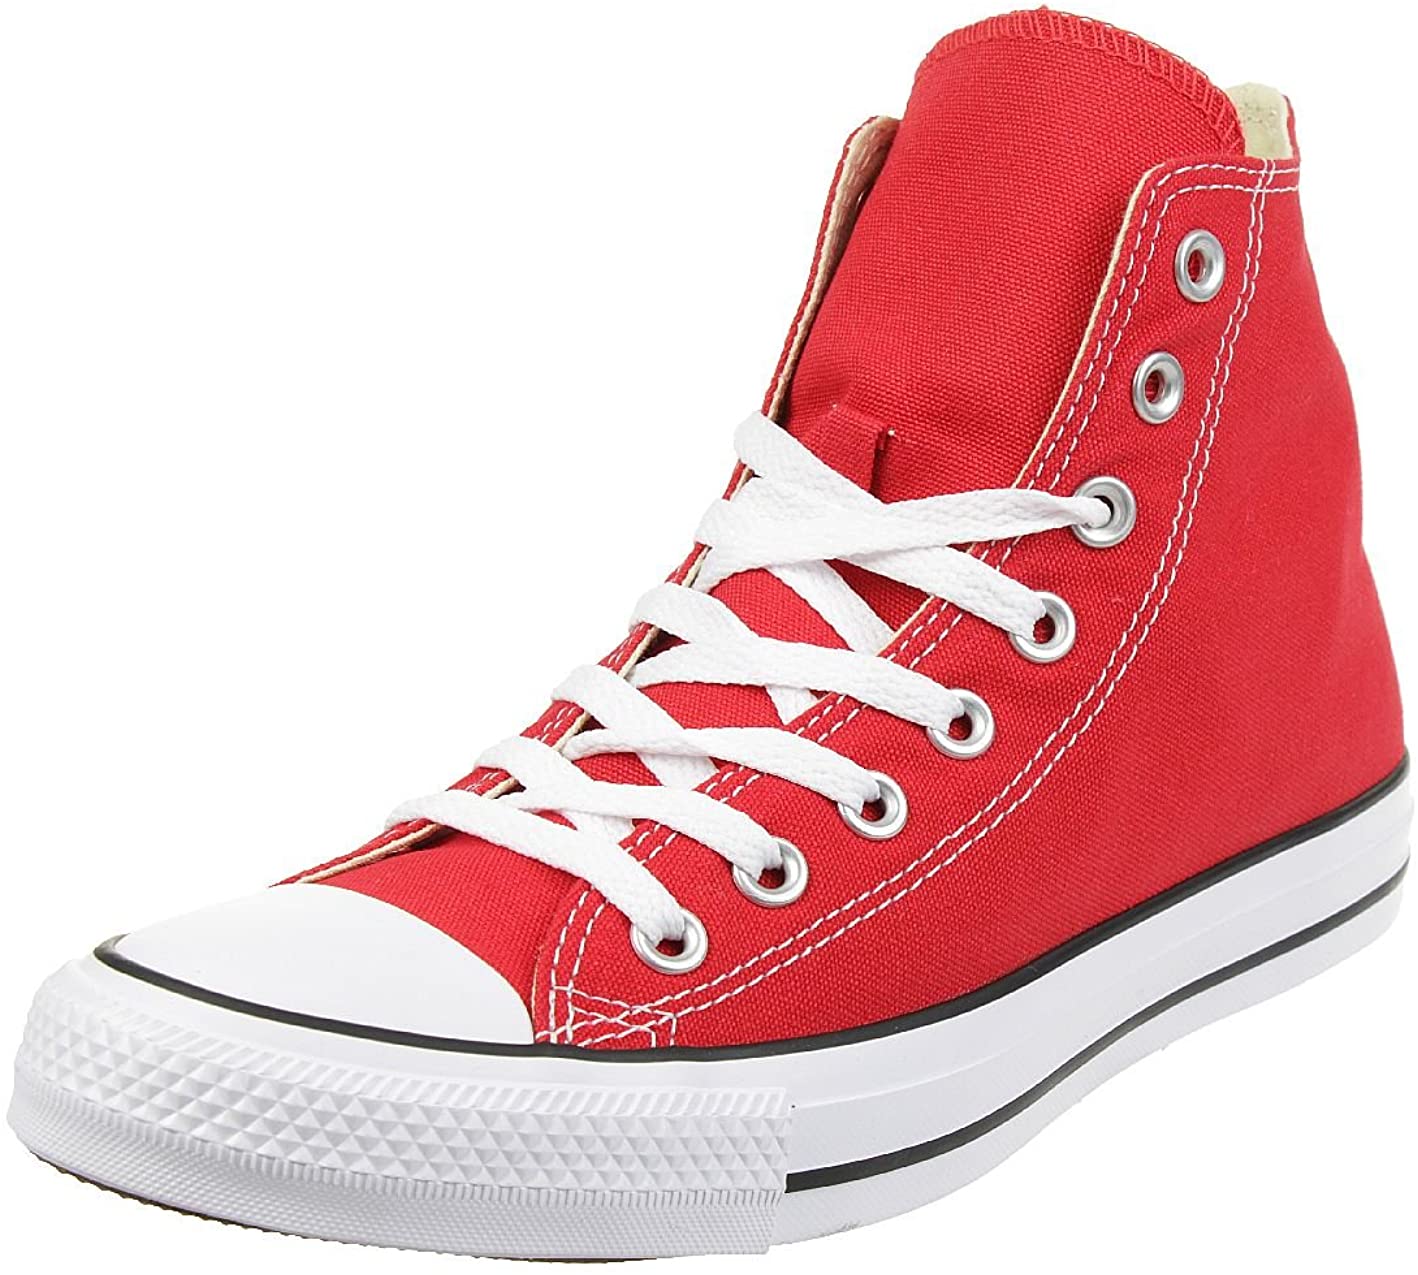 Converse Chuck Taylor All Star Canvas Hi Top Unisex Sneakers - Red - 4.5M/6.5W